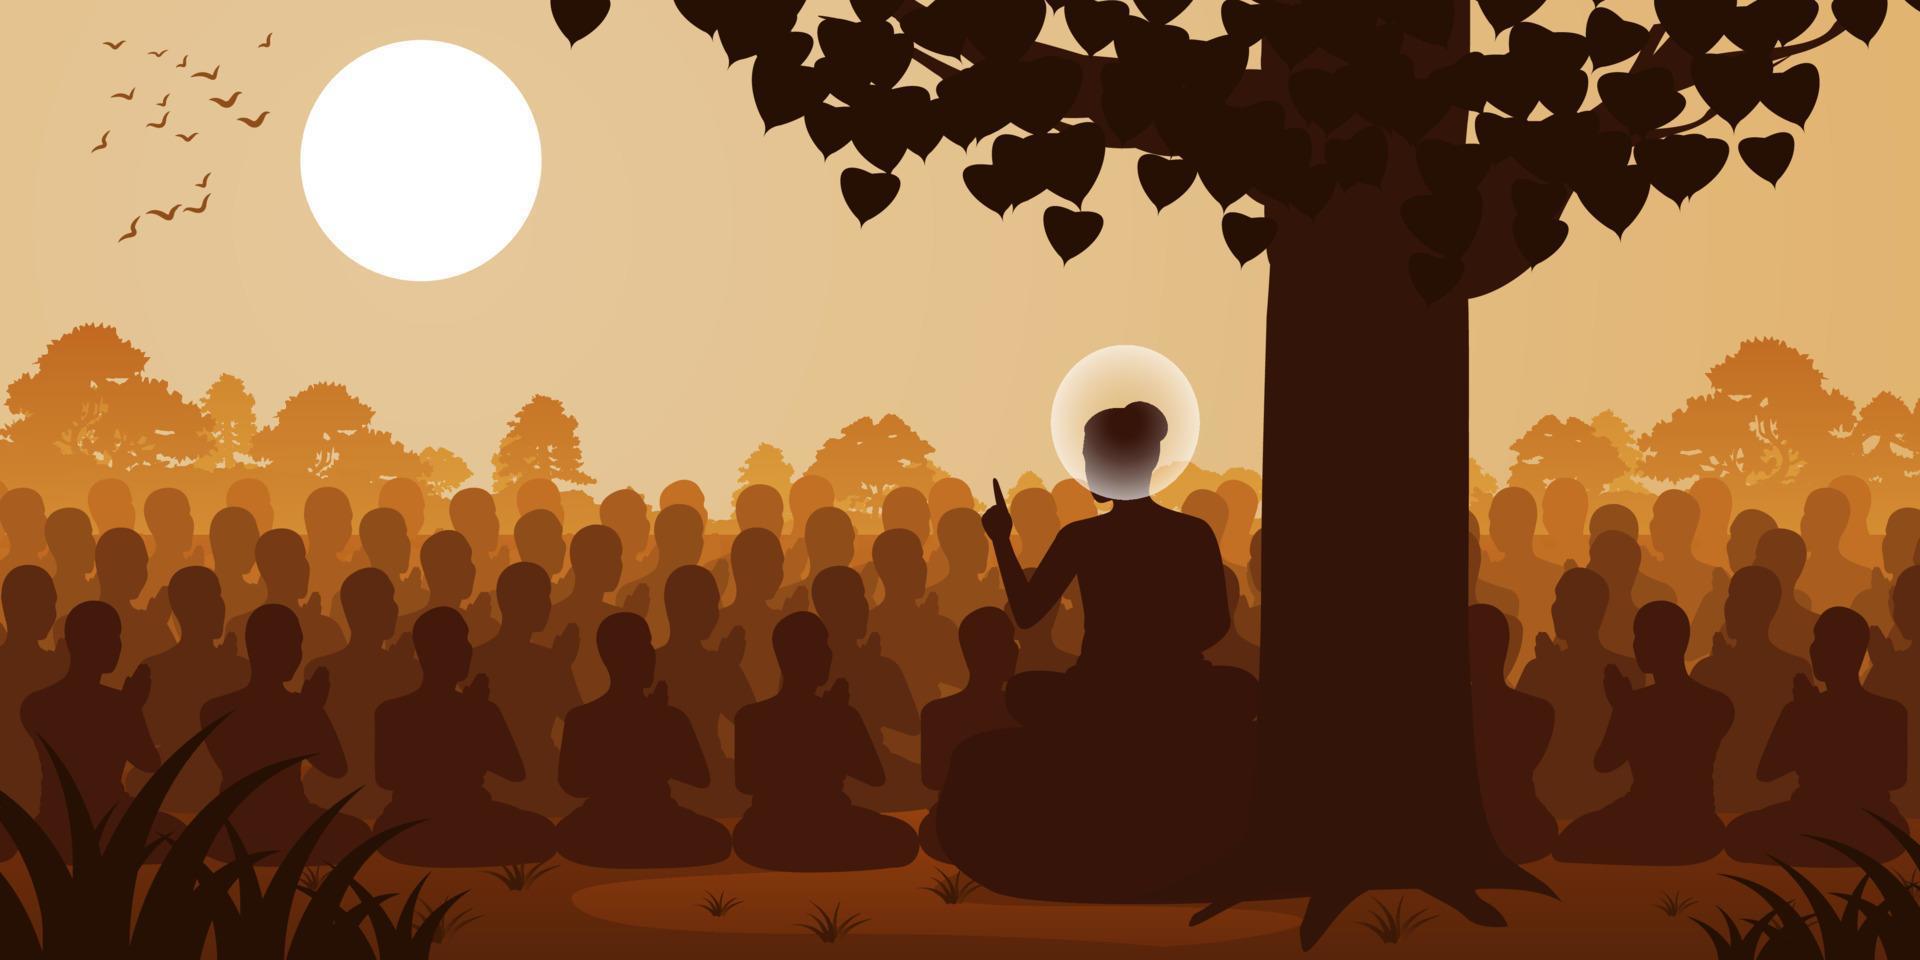 Lord of Buddha sermon dharma to crowd of monk,silhouette style vector